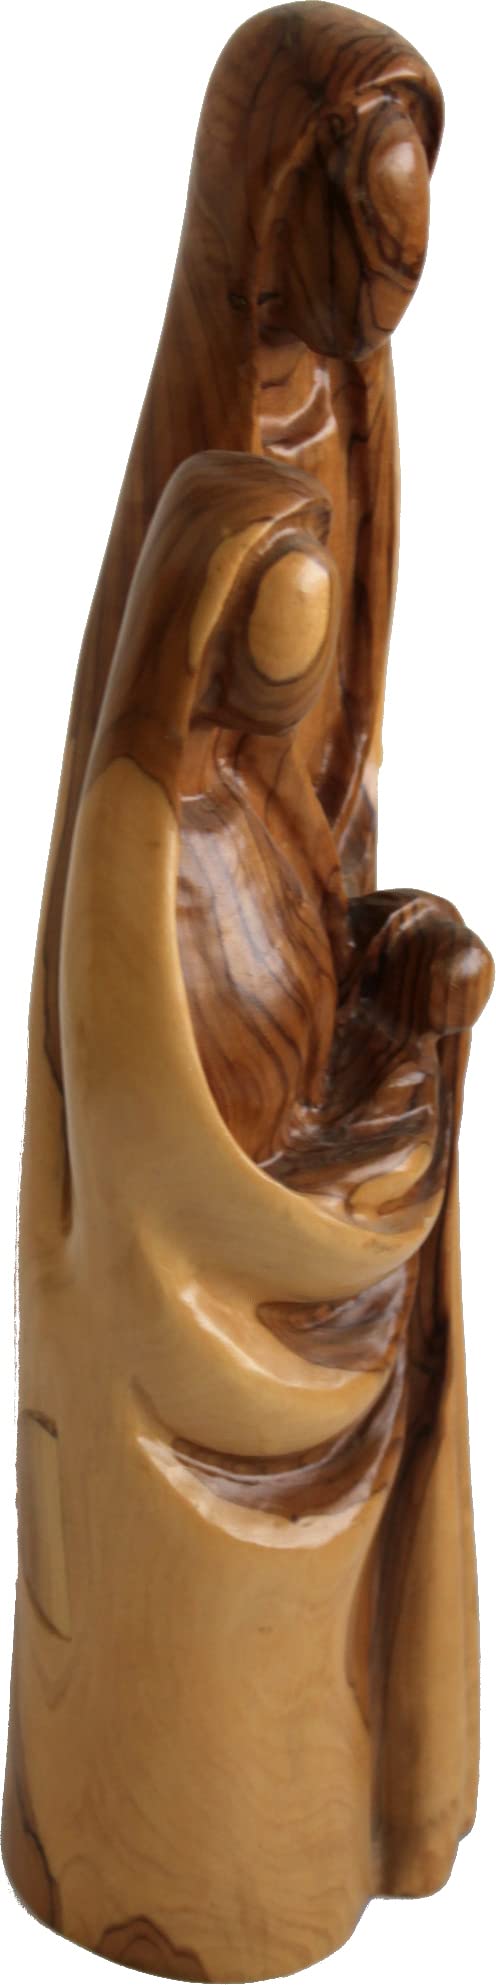 Holy Land Market Olive Wood Holy Family Statue - Abstract Modern Carving (13 Inches Large)